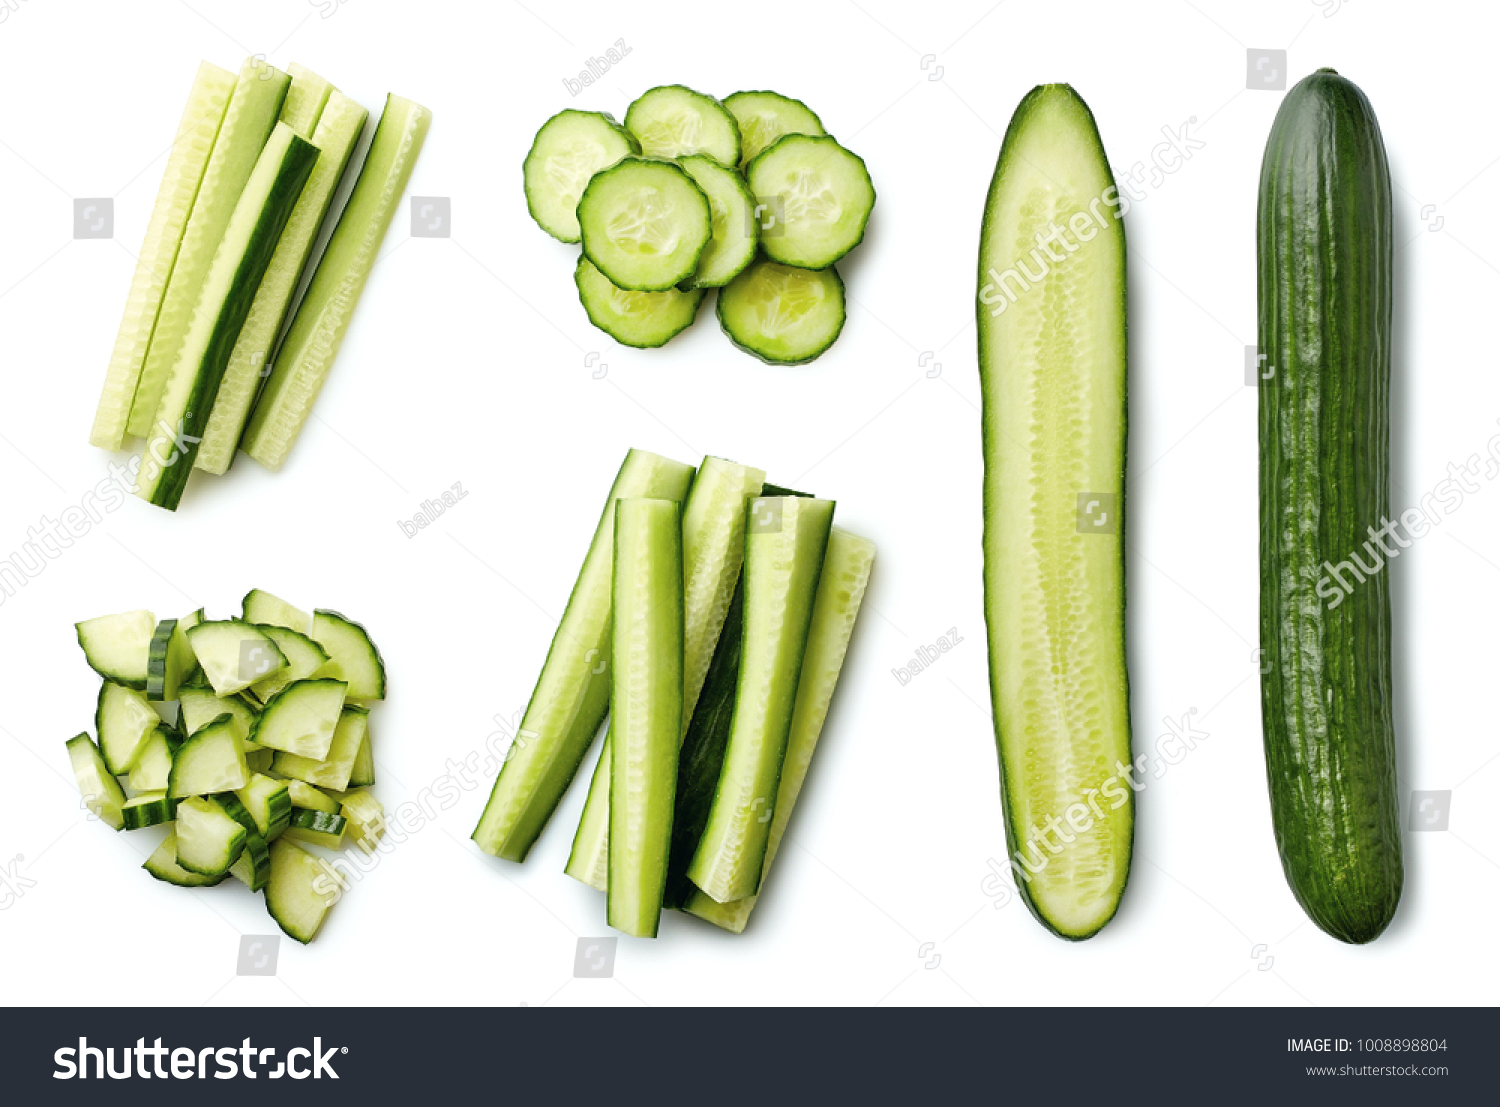 Fresh whole and sliced cucumber isolated on white background. Top view #1008898804